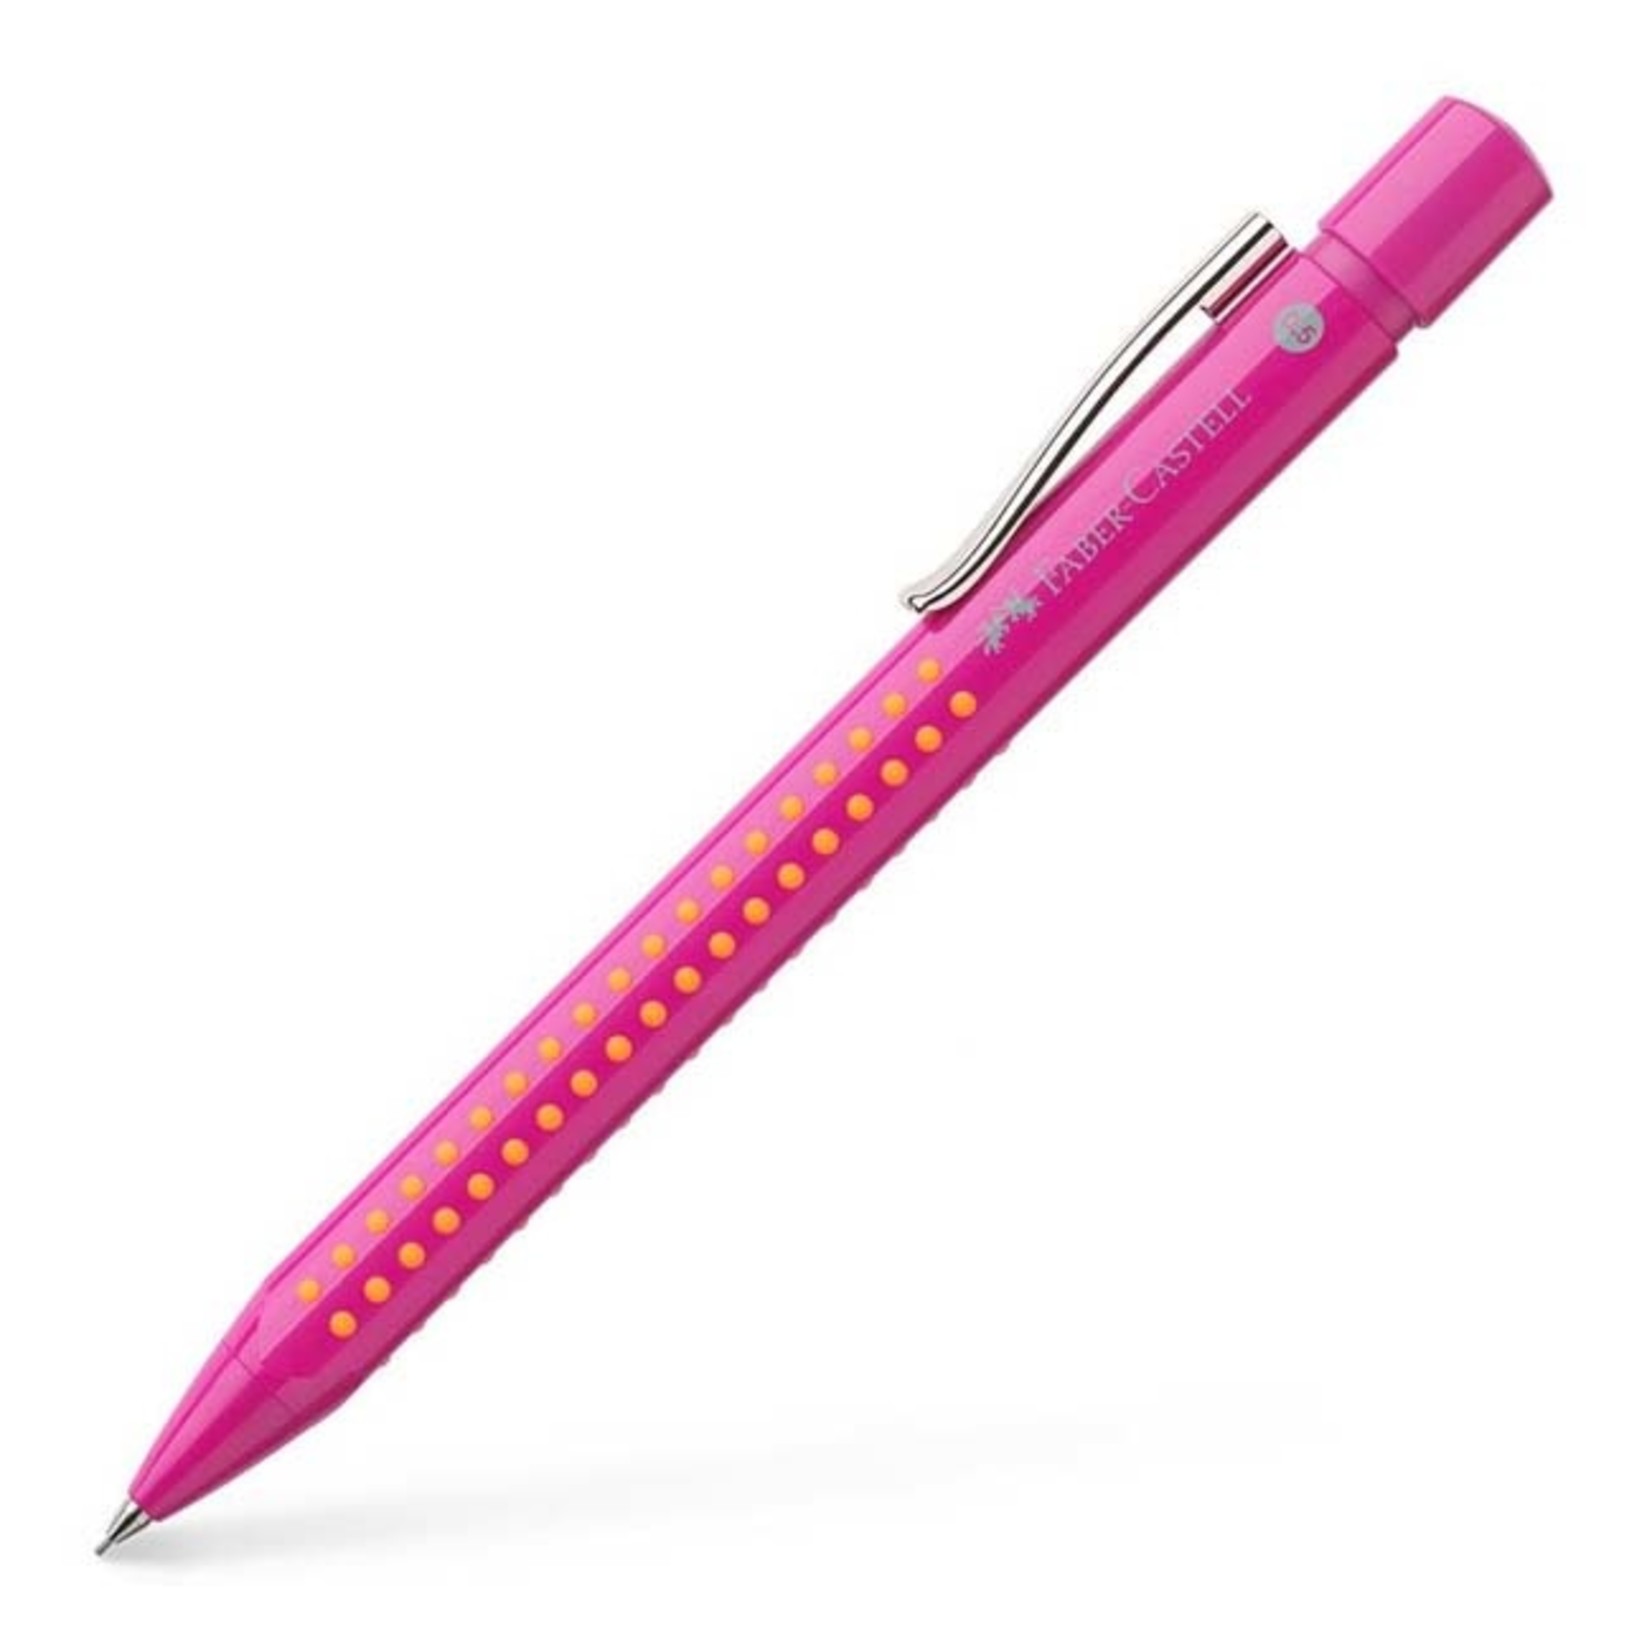 FABER CASTELL GRIP 2010 HARMONY MECHANICAL PENCIL 0.5MM PINK